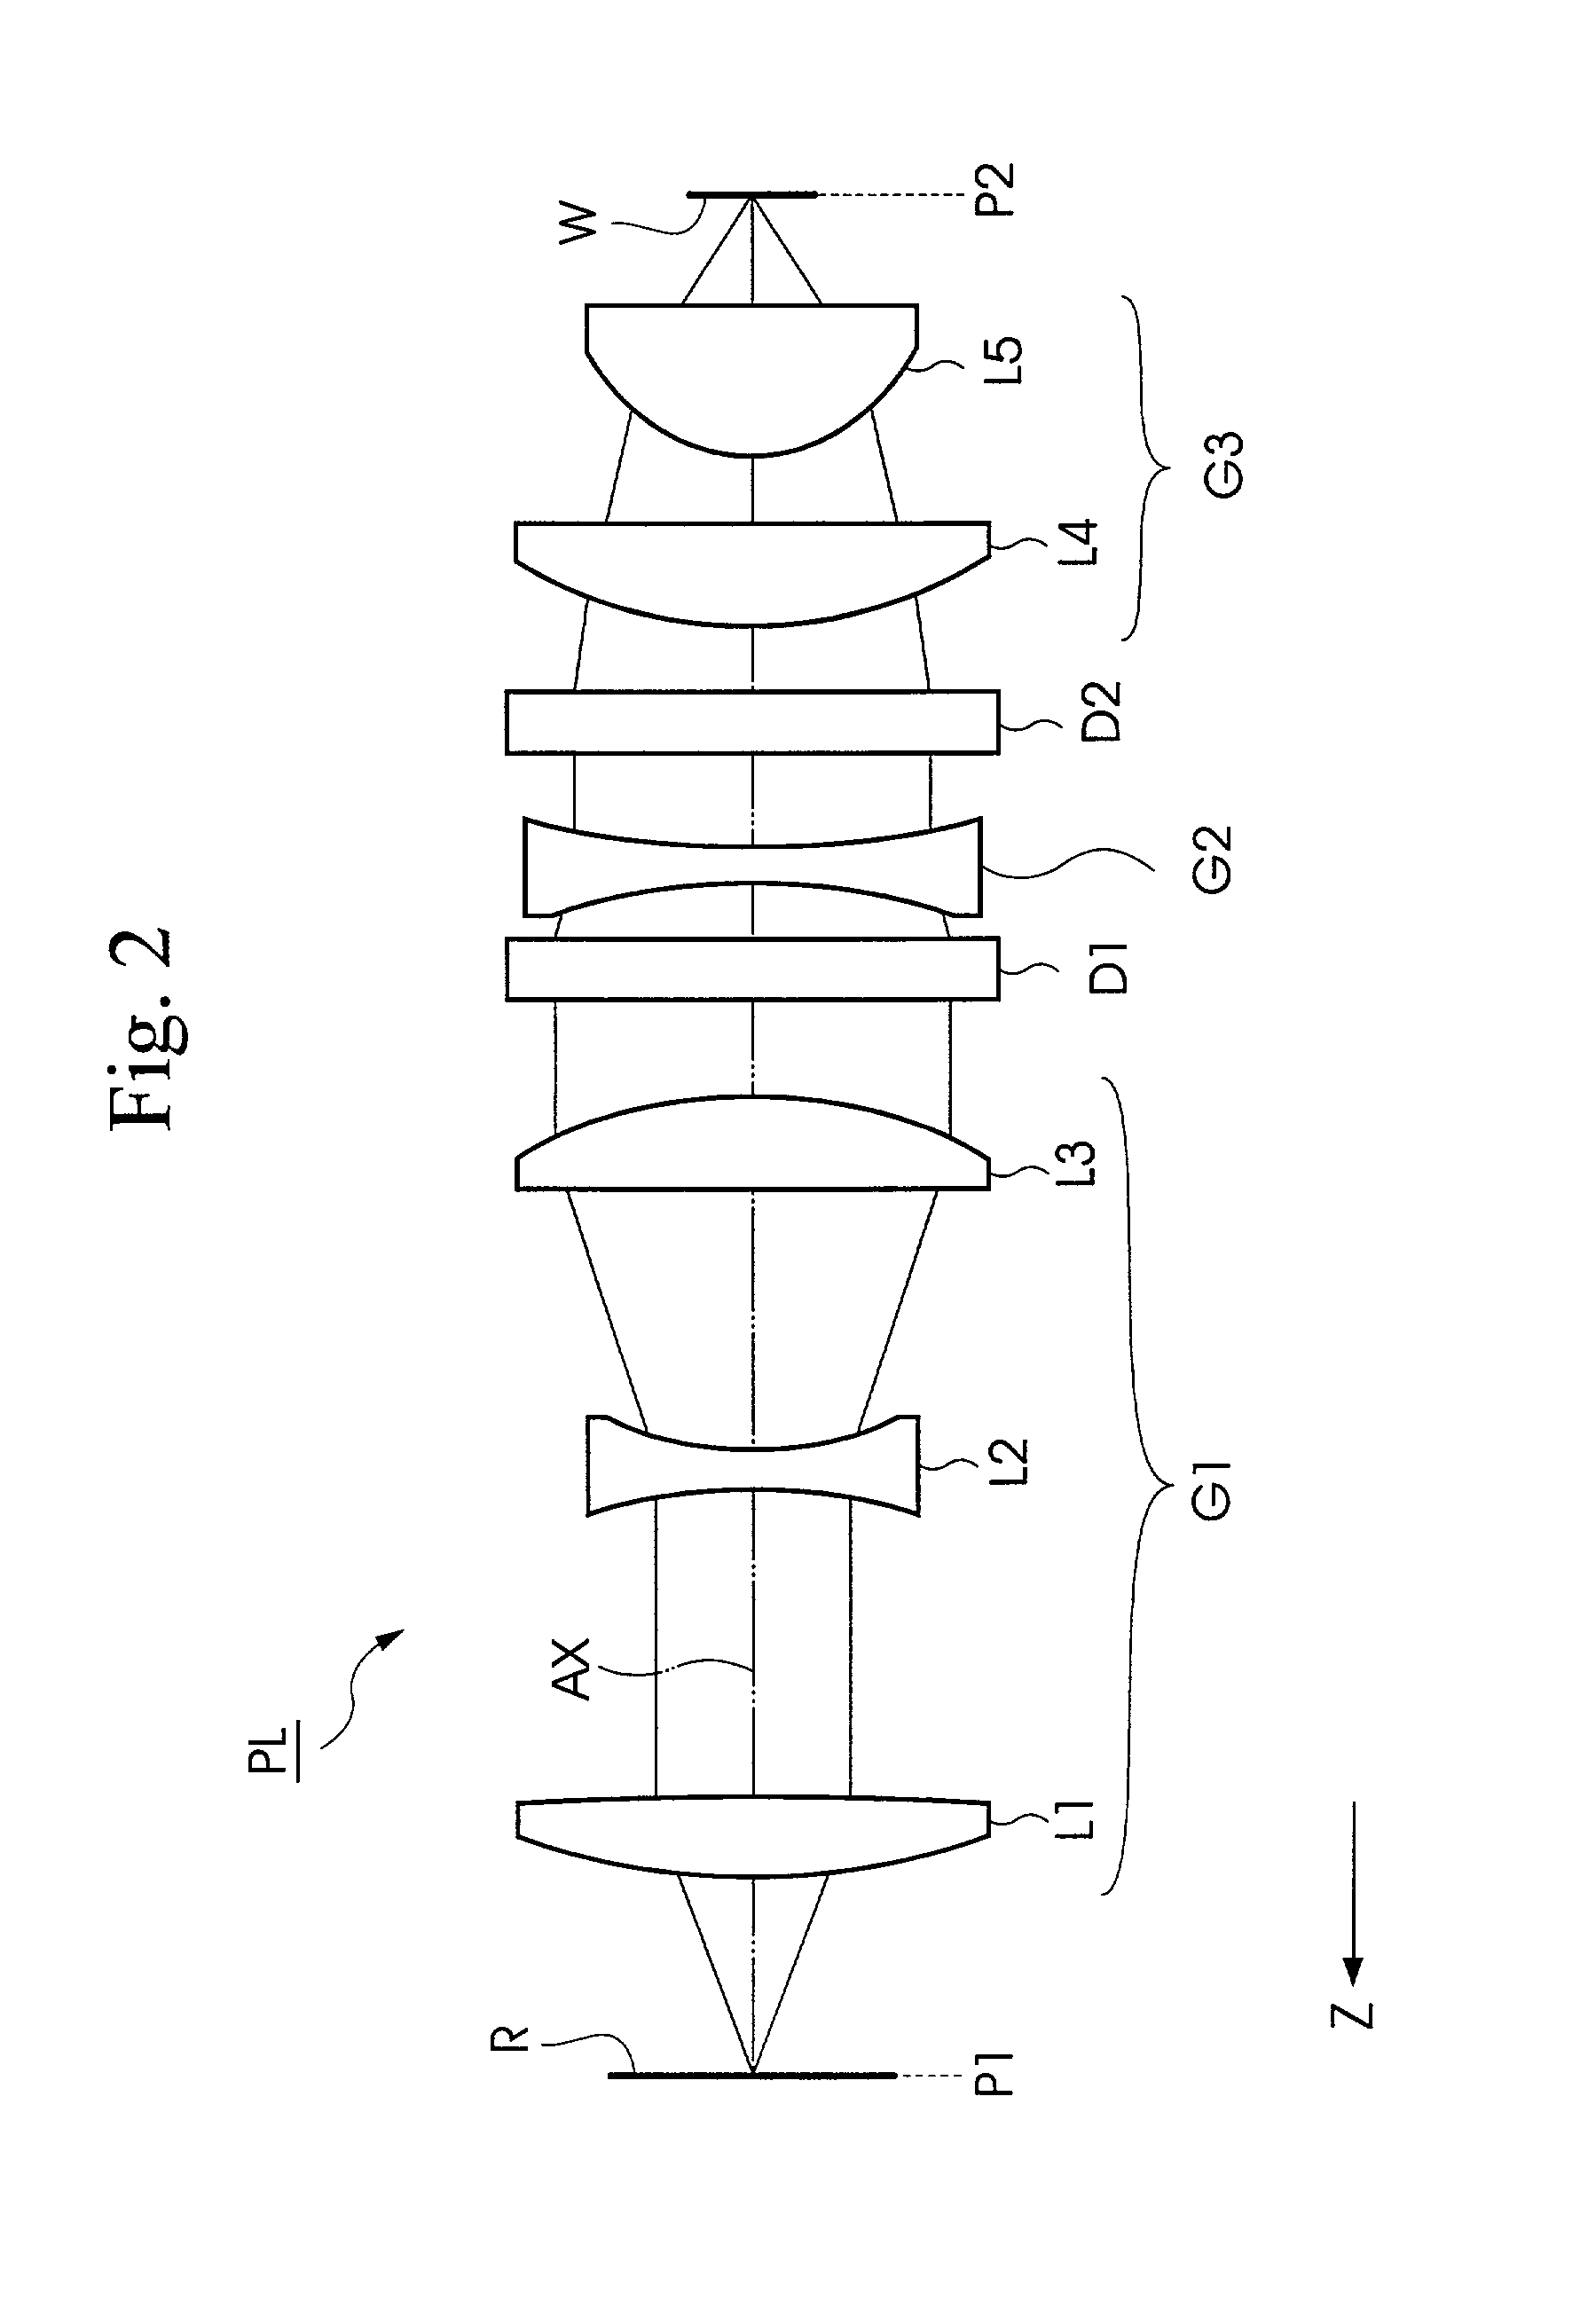 Projection optical system, exposure apparatus incorporating this projection optical system, and manufacturing method for micro devices using the exposure apparatus